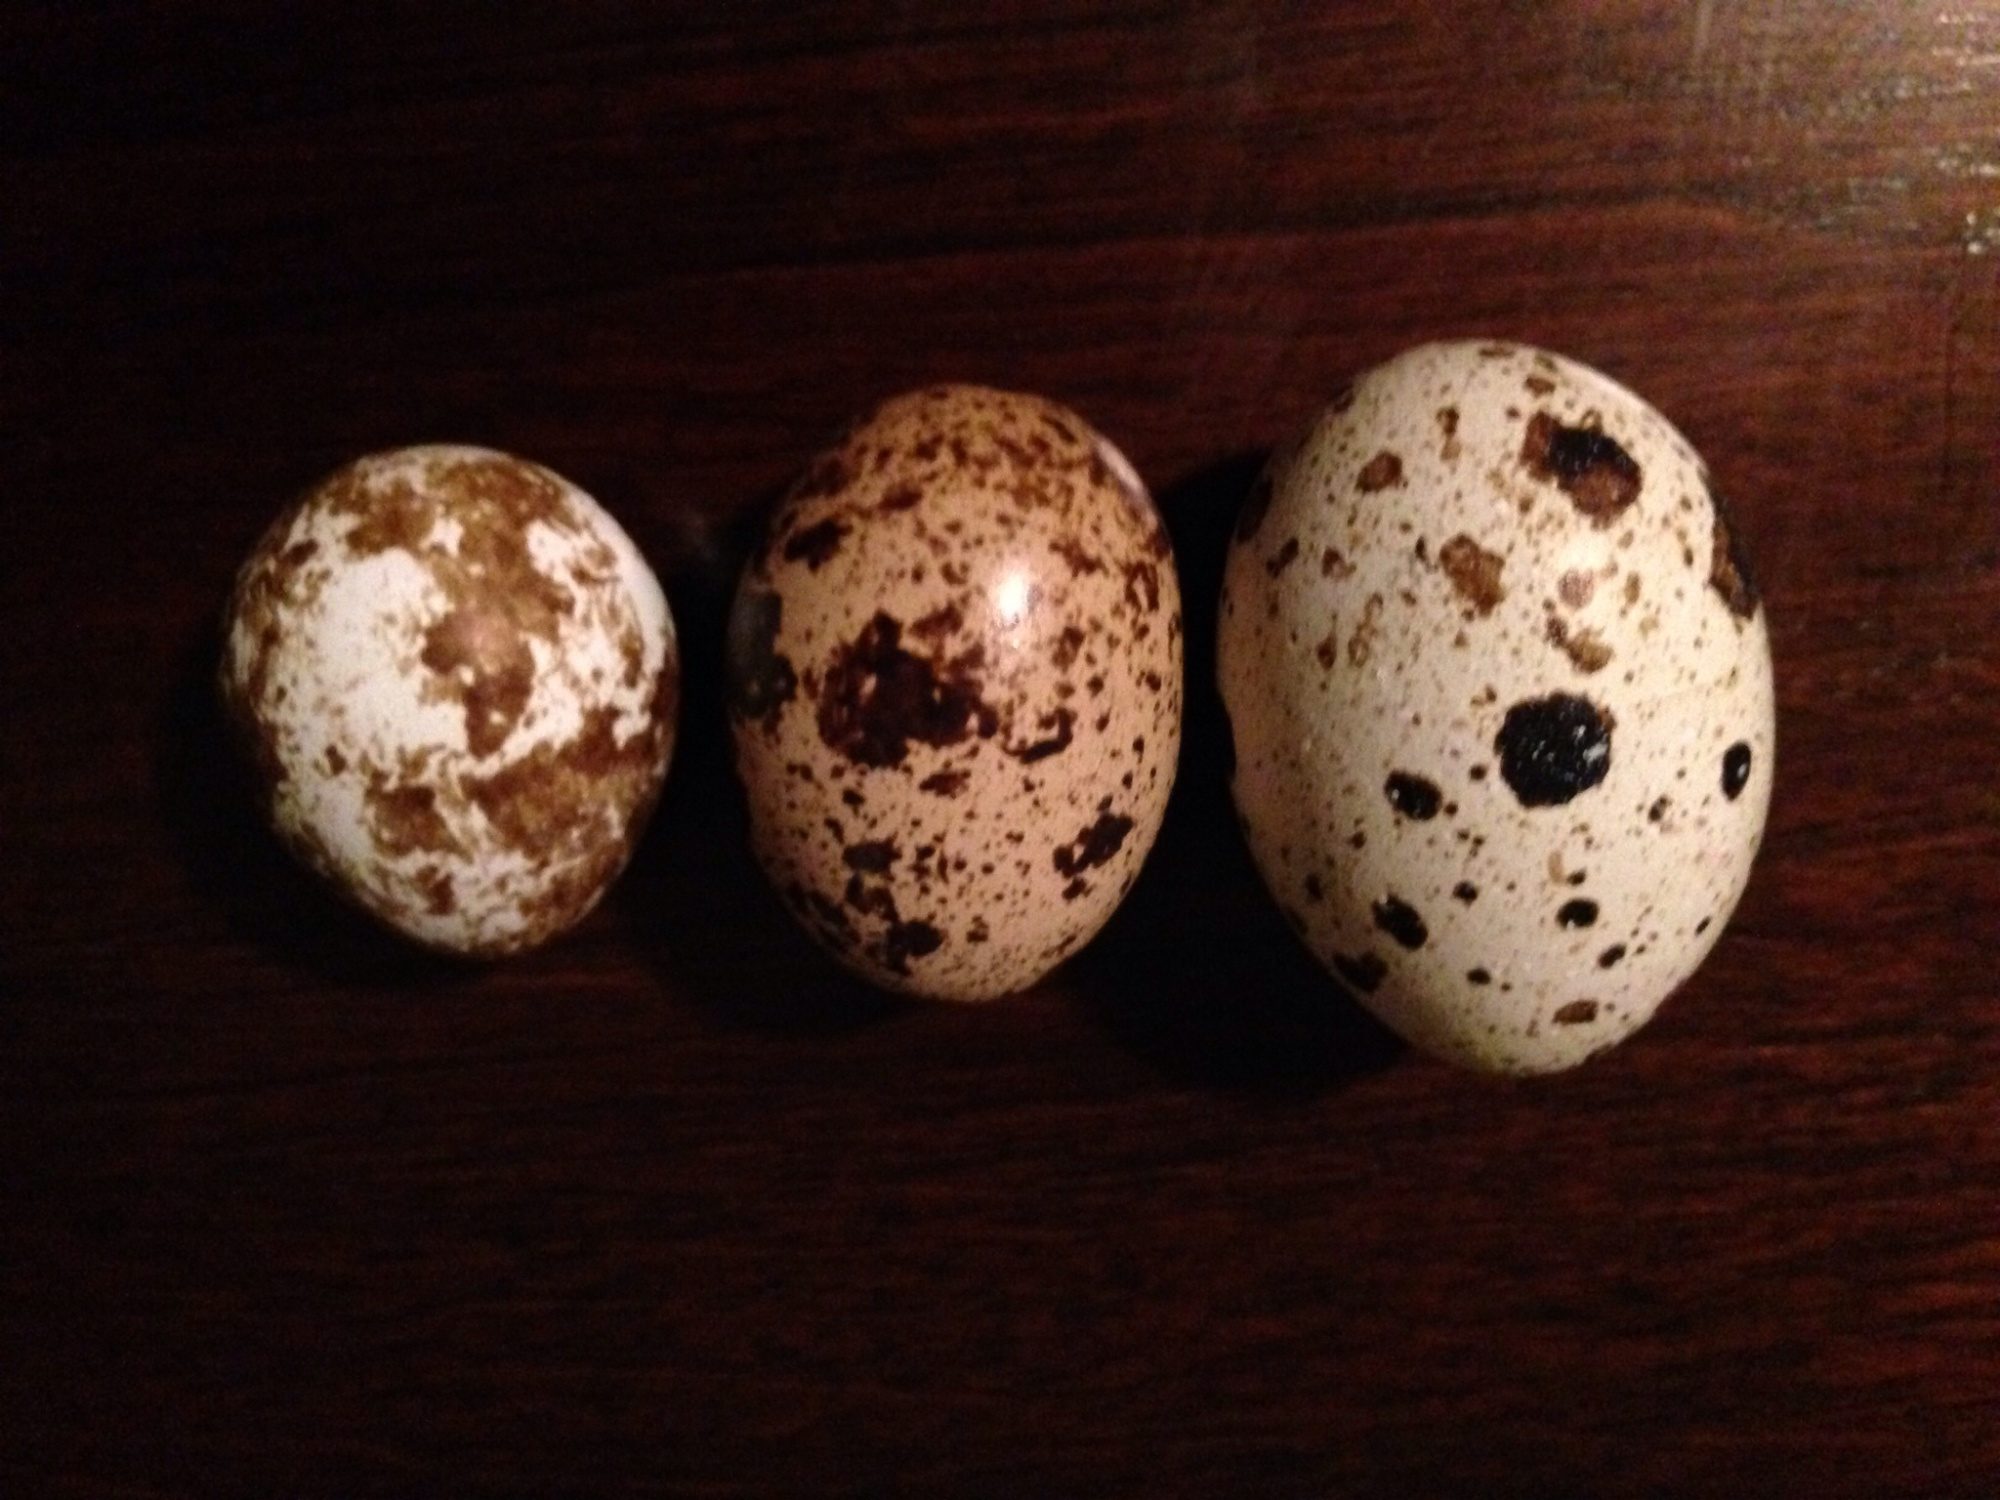 Quail eggs: leftmost is from a coturnix, middle is from a Texas A&M & the rightmost is a double yolker from another Texas A&M